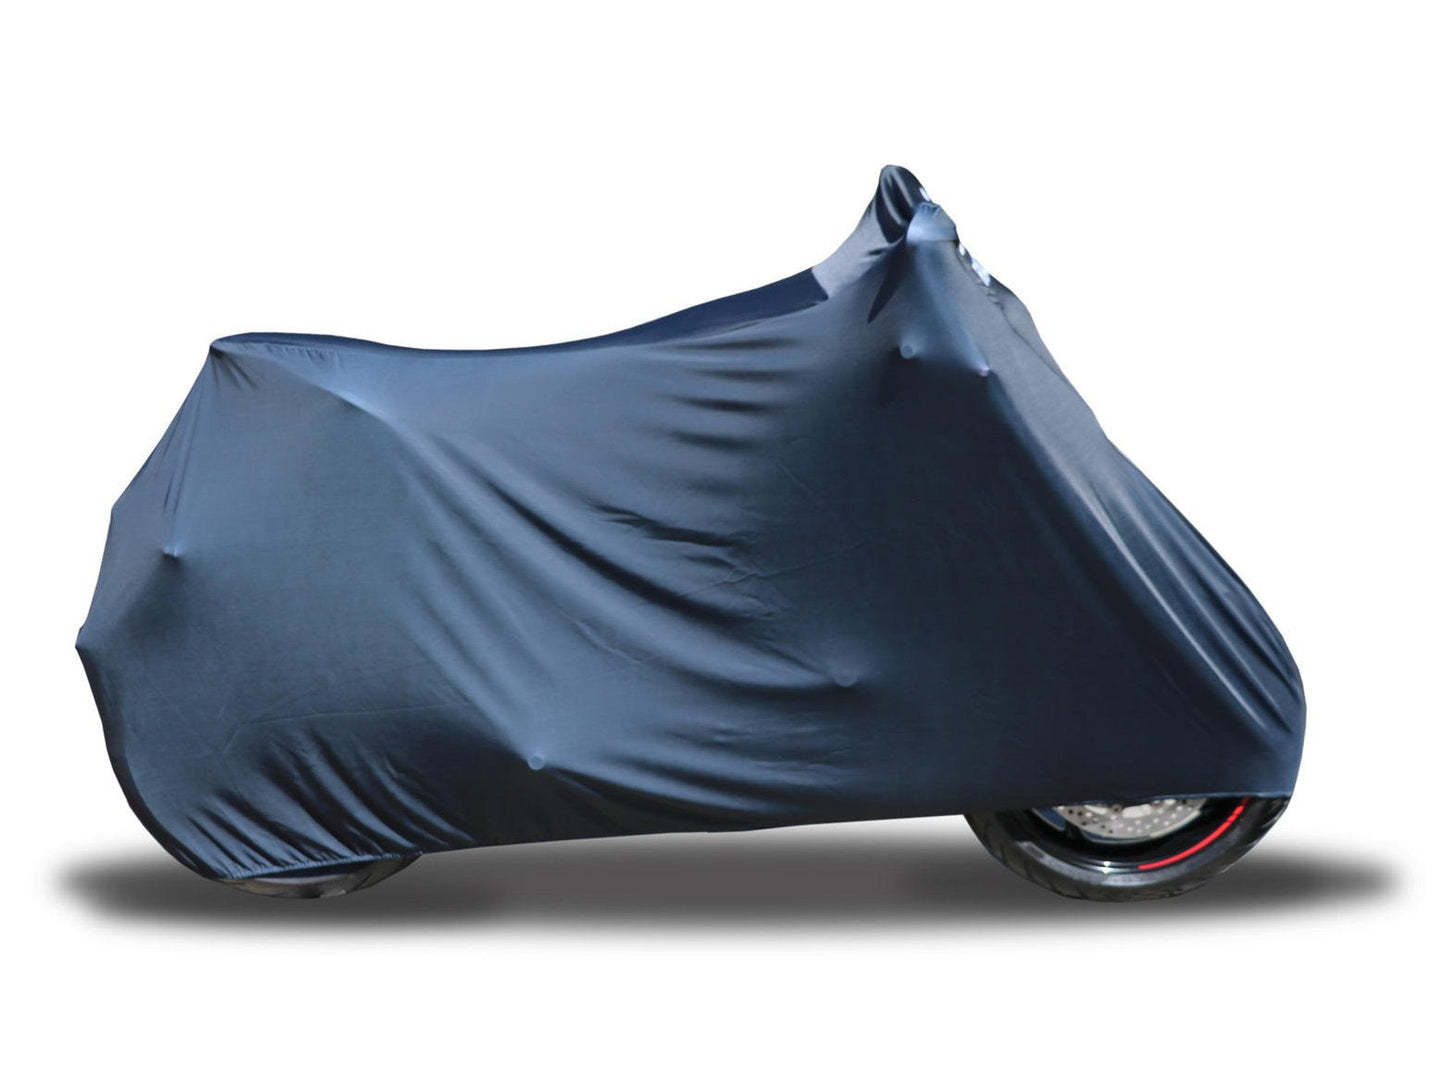 CNC RACING Indoor Motorcycle Cover (Naked)